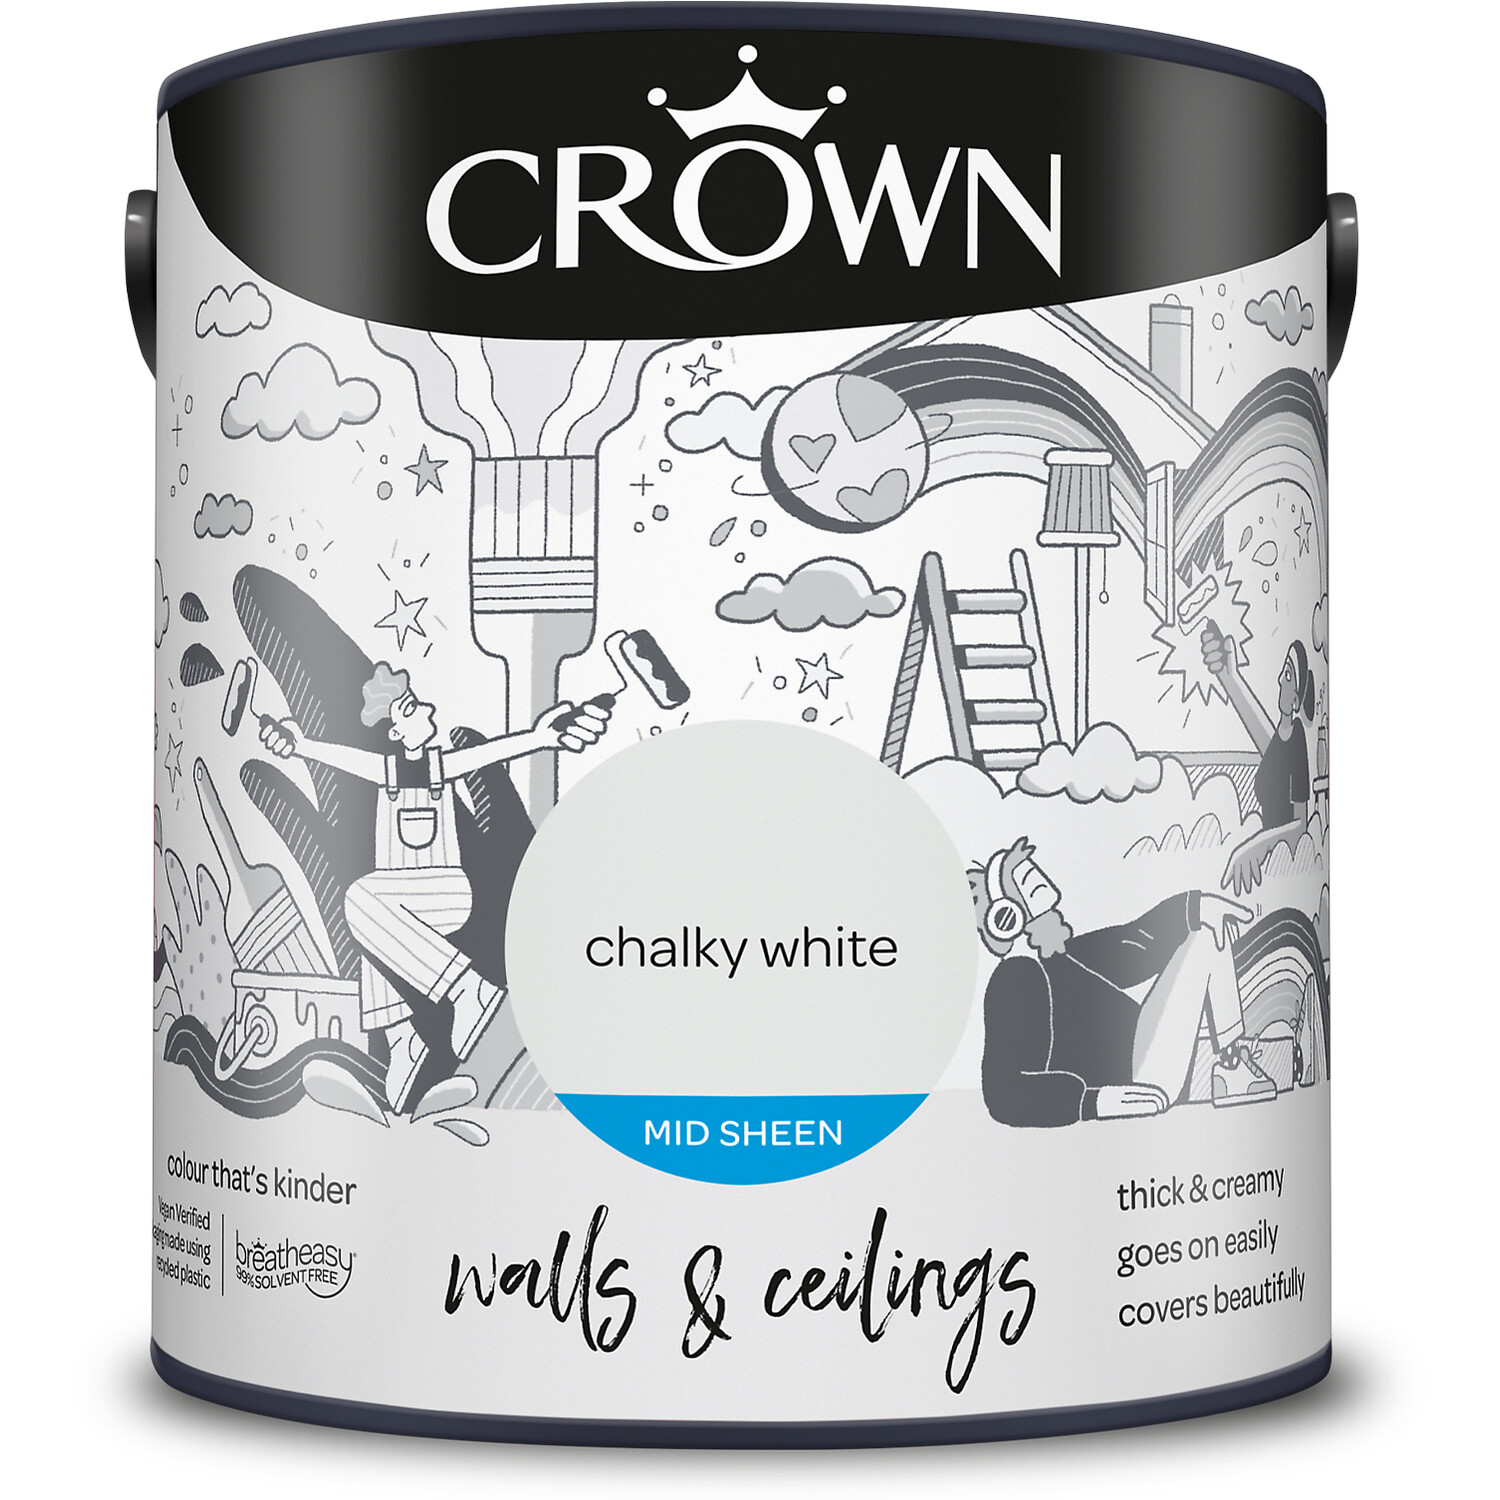 Crown Walls & Ceilings Chalky White Mid Sheen Emulsion Paint 2.5L Image 2